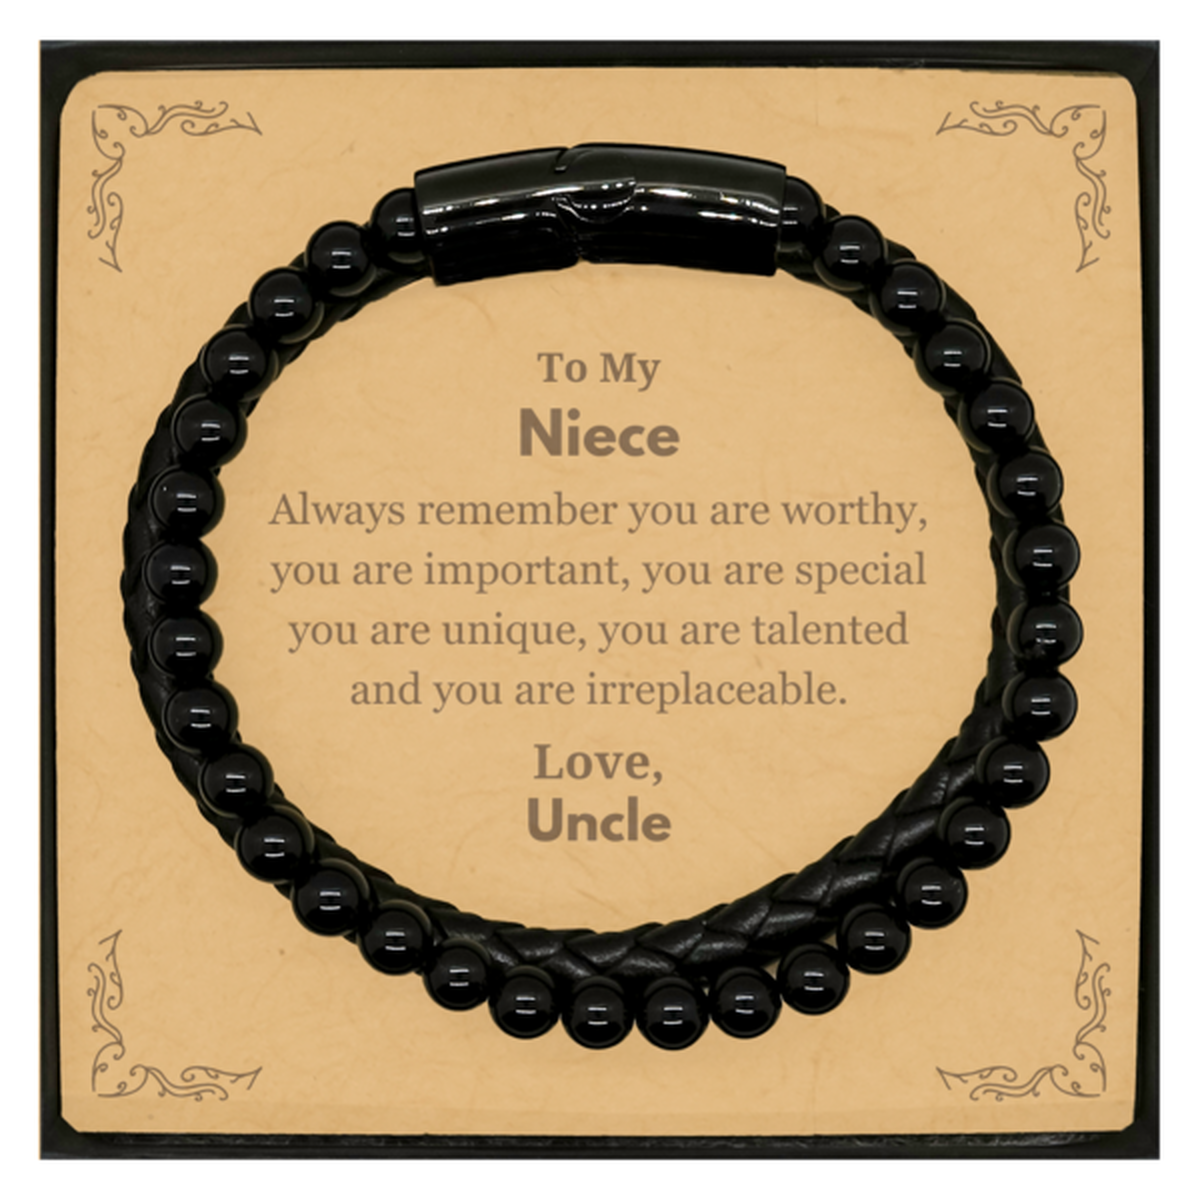 Niece Birthday Gifts from Uncle, Inspirational Stone Leather Bracelets for Niece Christmas Graduation Gifts for Niece Always remember you are worthy, you are important. Love, Uncle